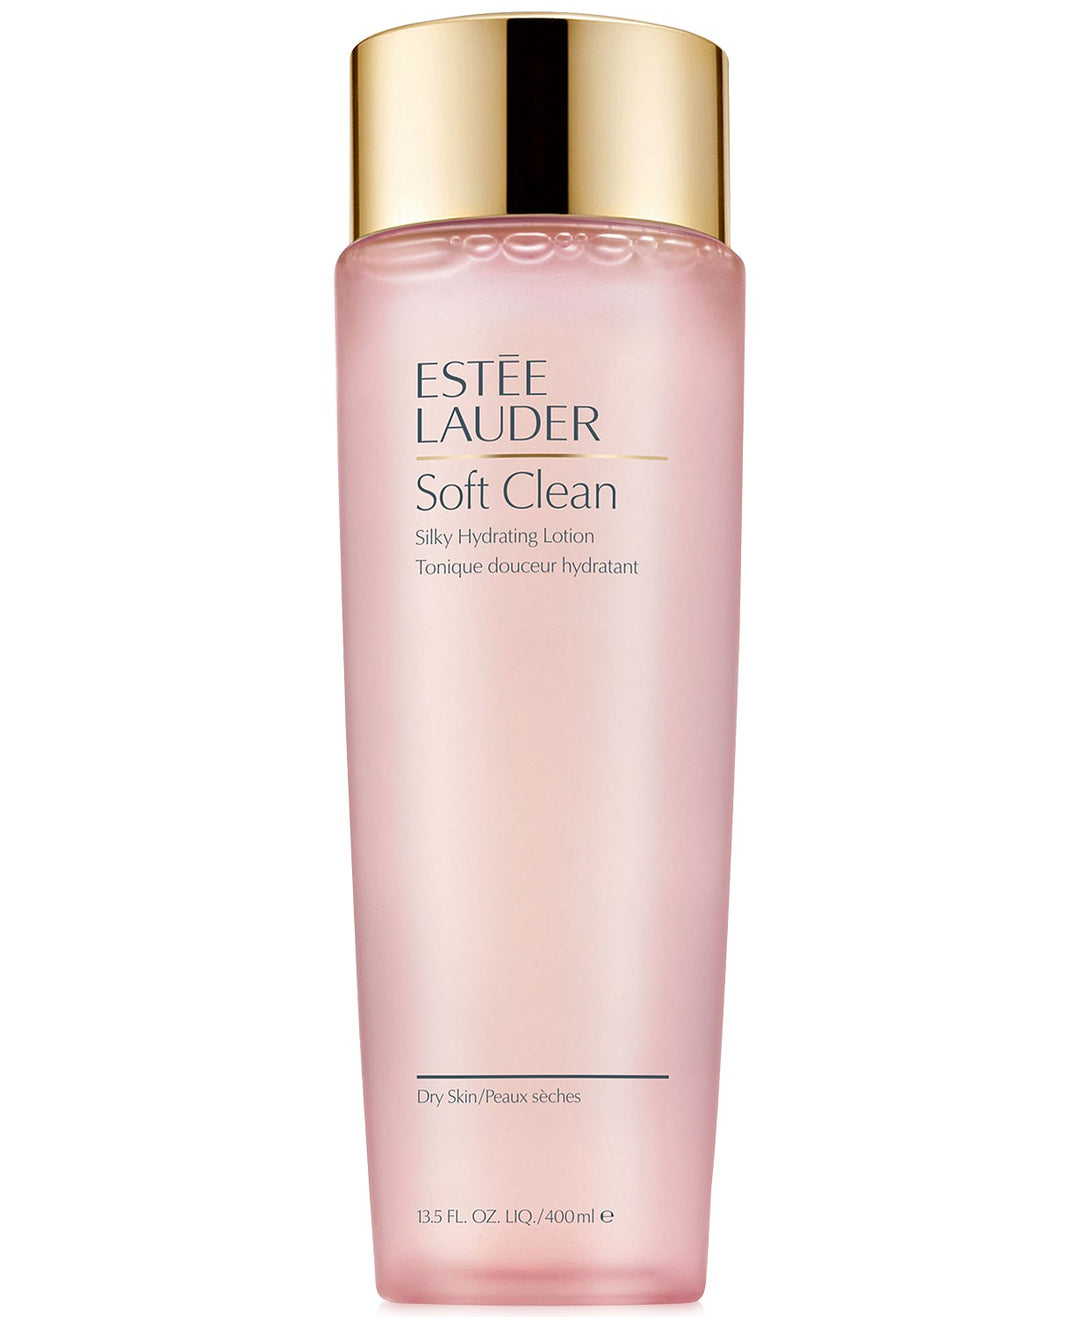 Soft Clean Silky Hydrating Lotion.